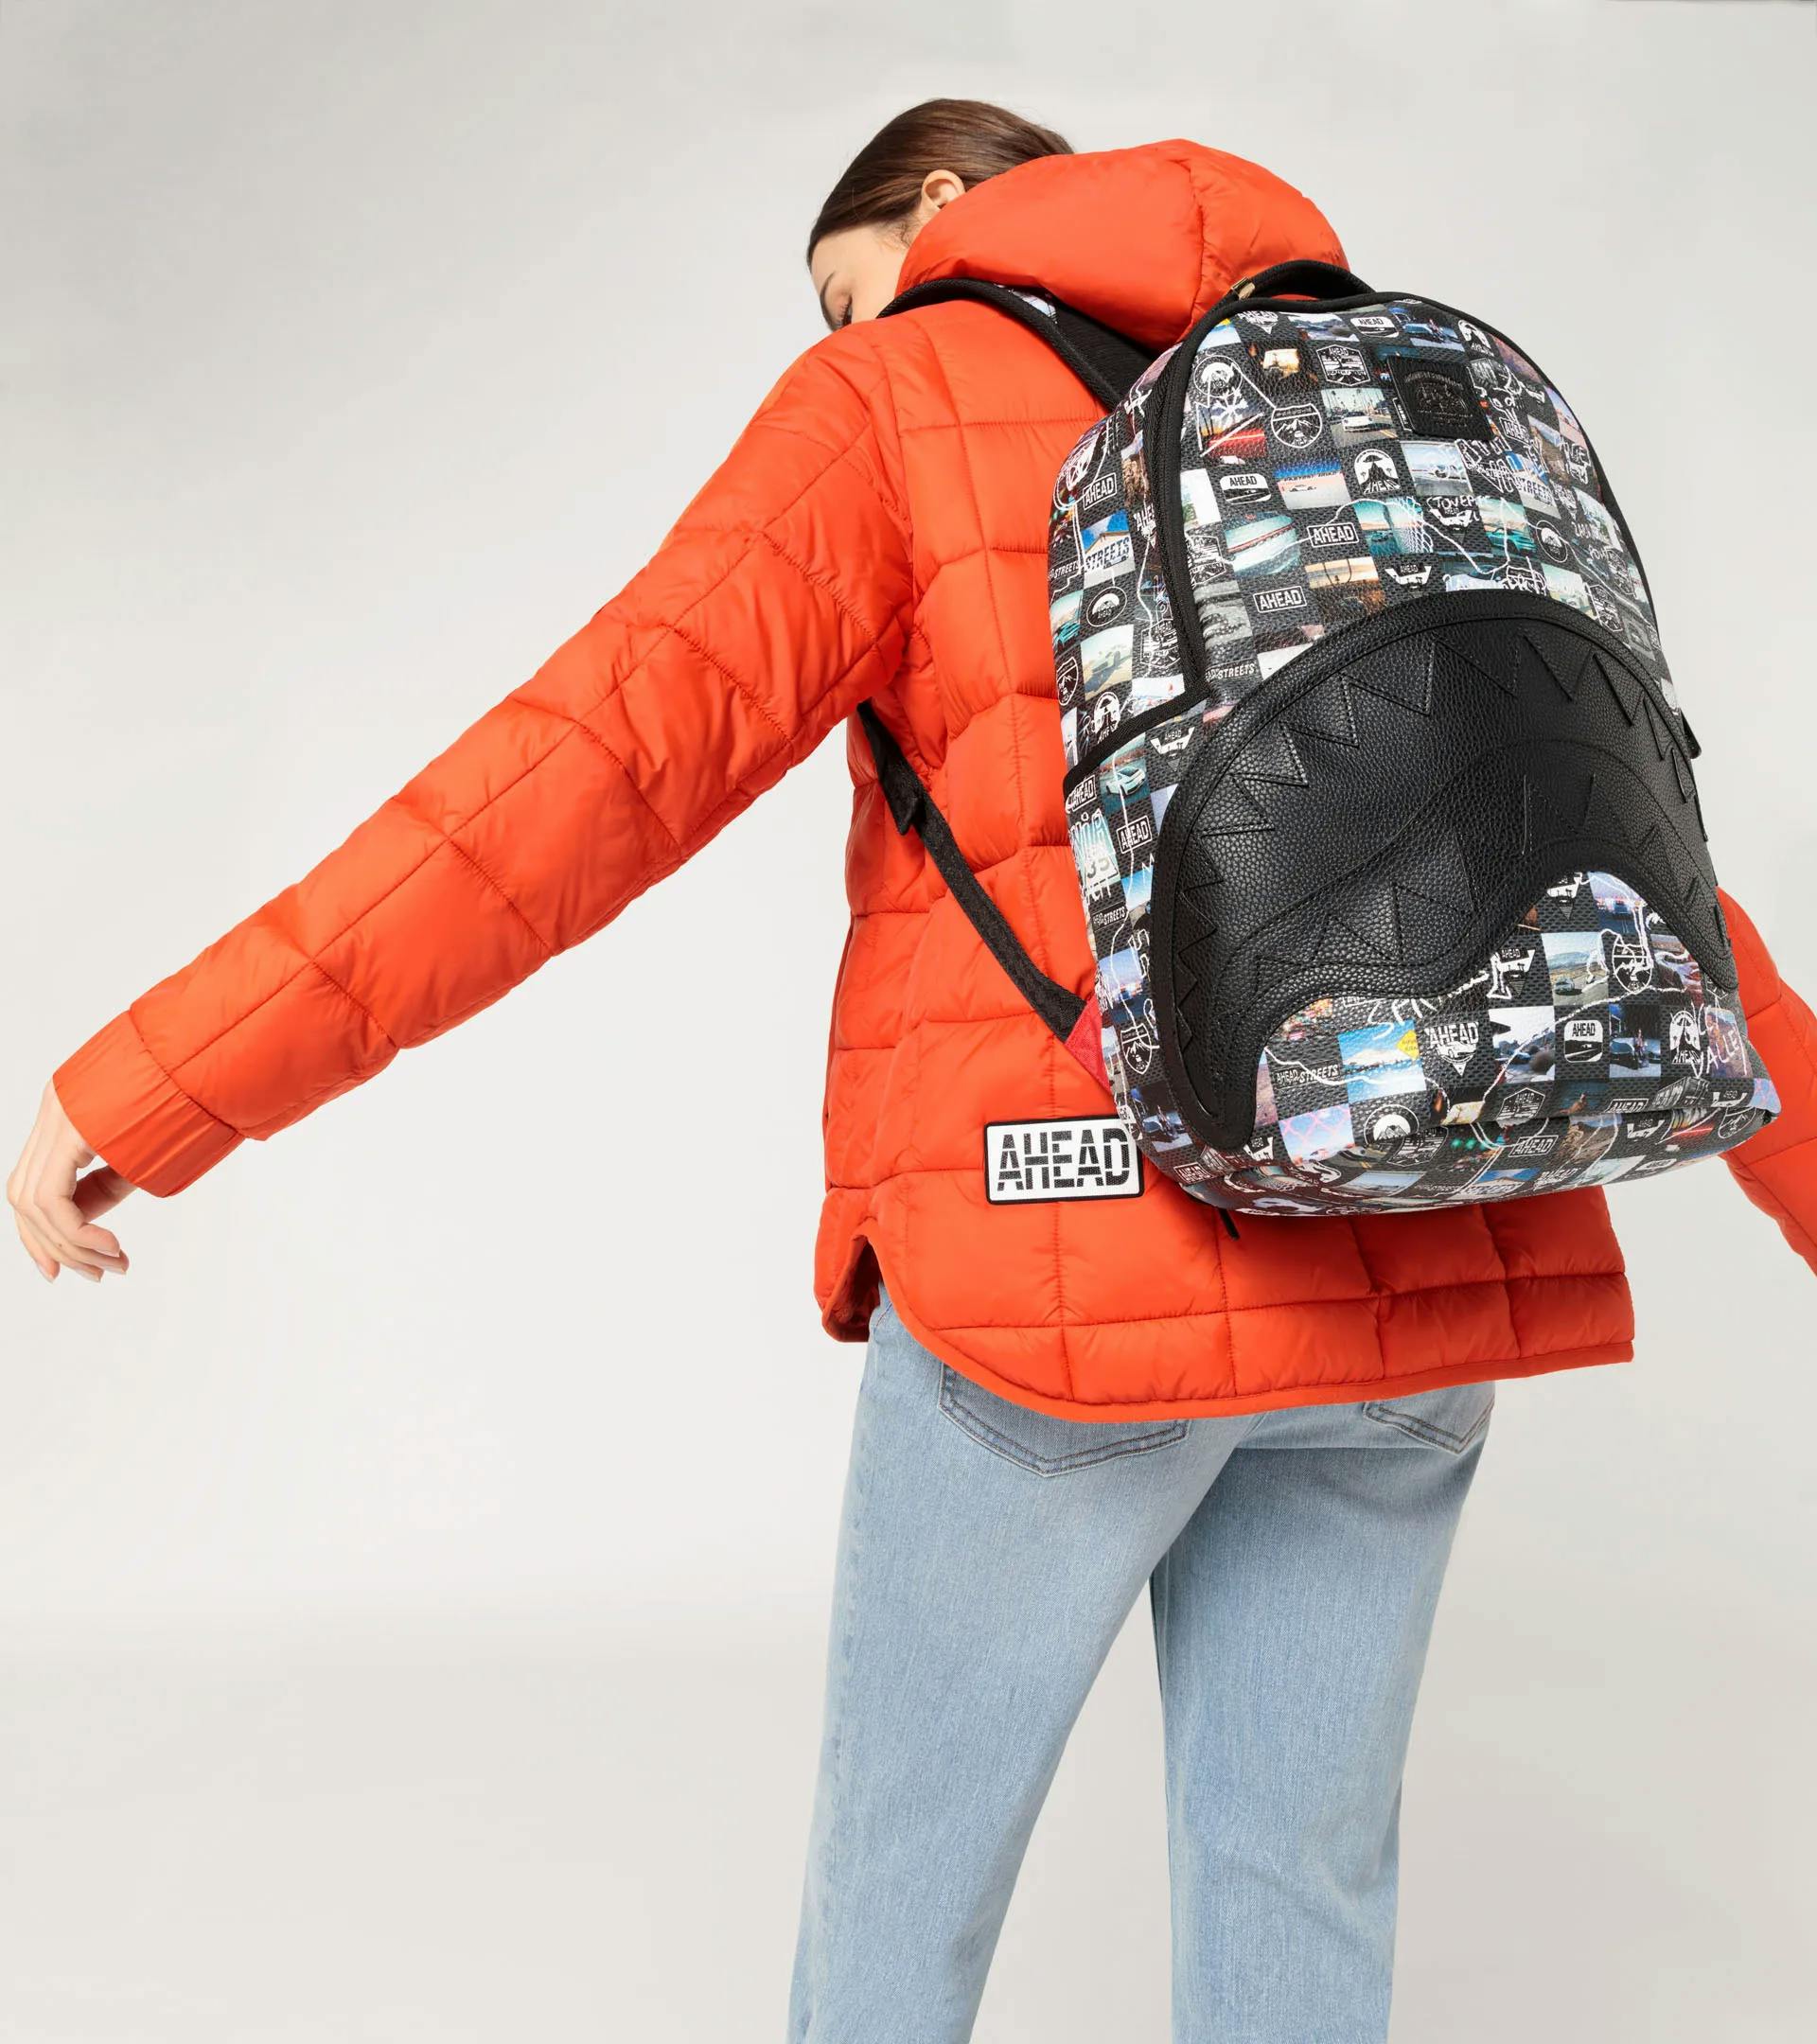 AHEAD Backpack – Limited Edition 6